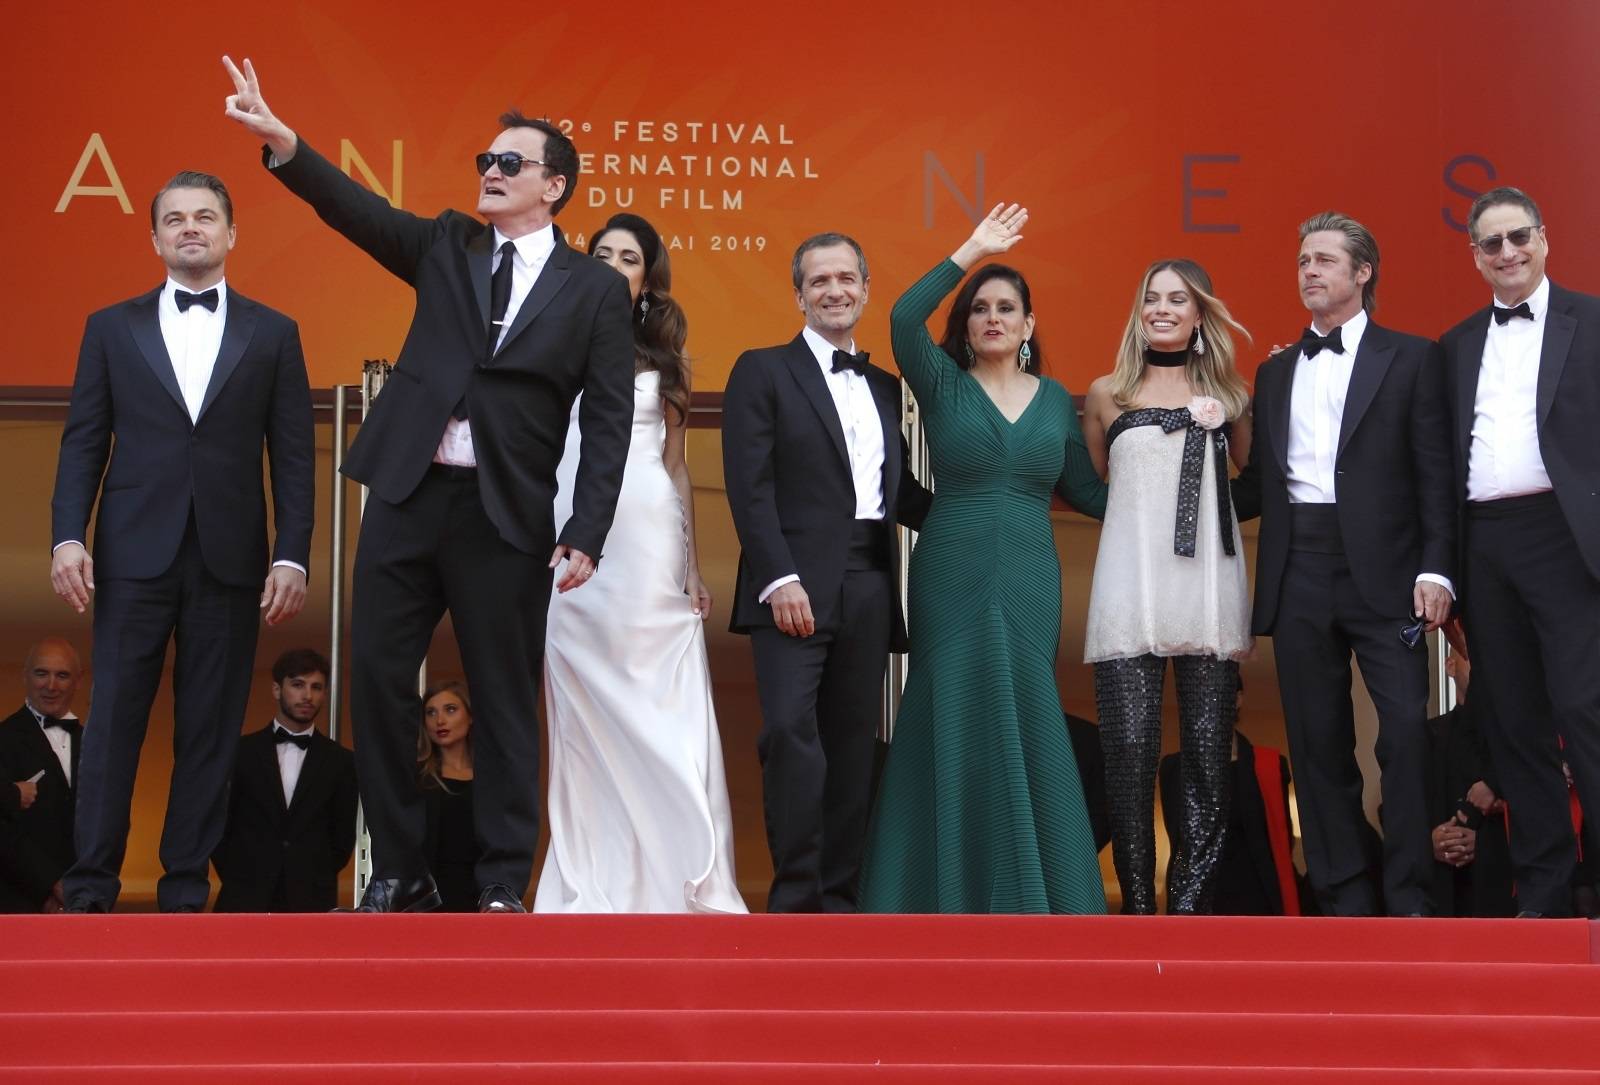 72nd Cannes Film Festival - Screening of the film "Once Upon a Time in Hollywood" in competition - Red Carpet Arrivals